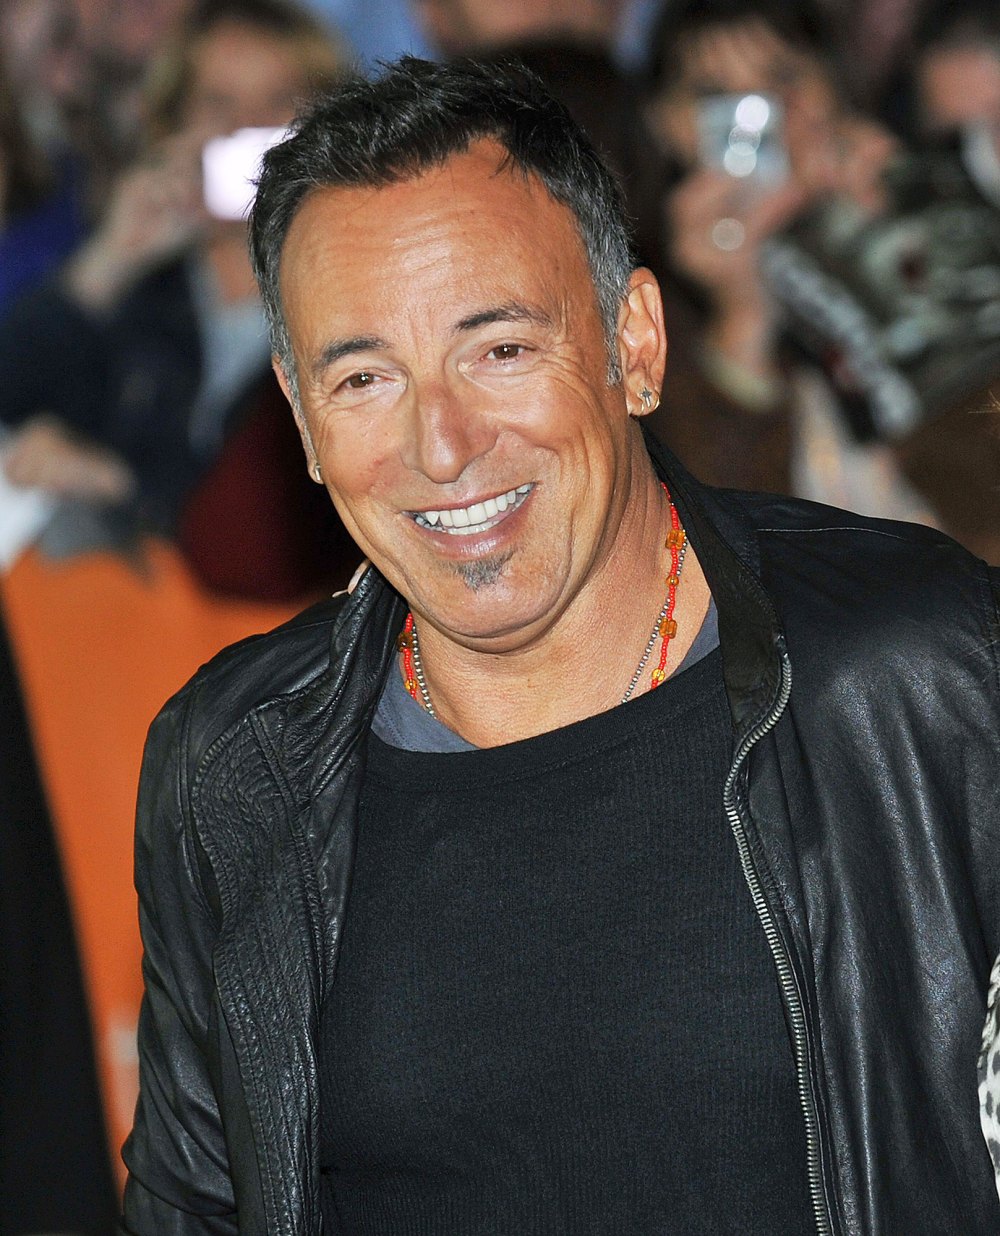 Is Bruce Springsteen Glee’s Next Big Guest Star?